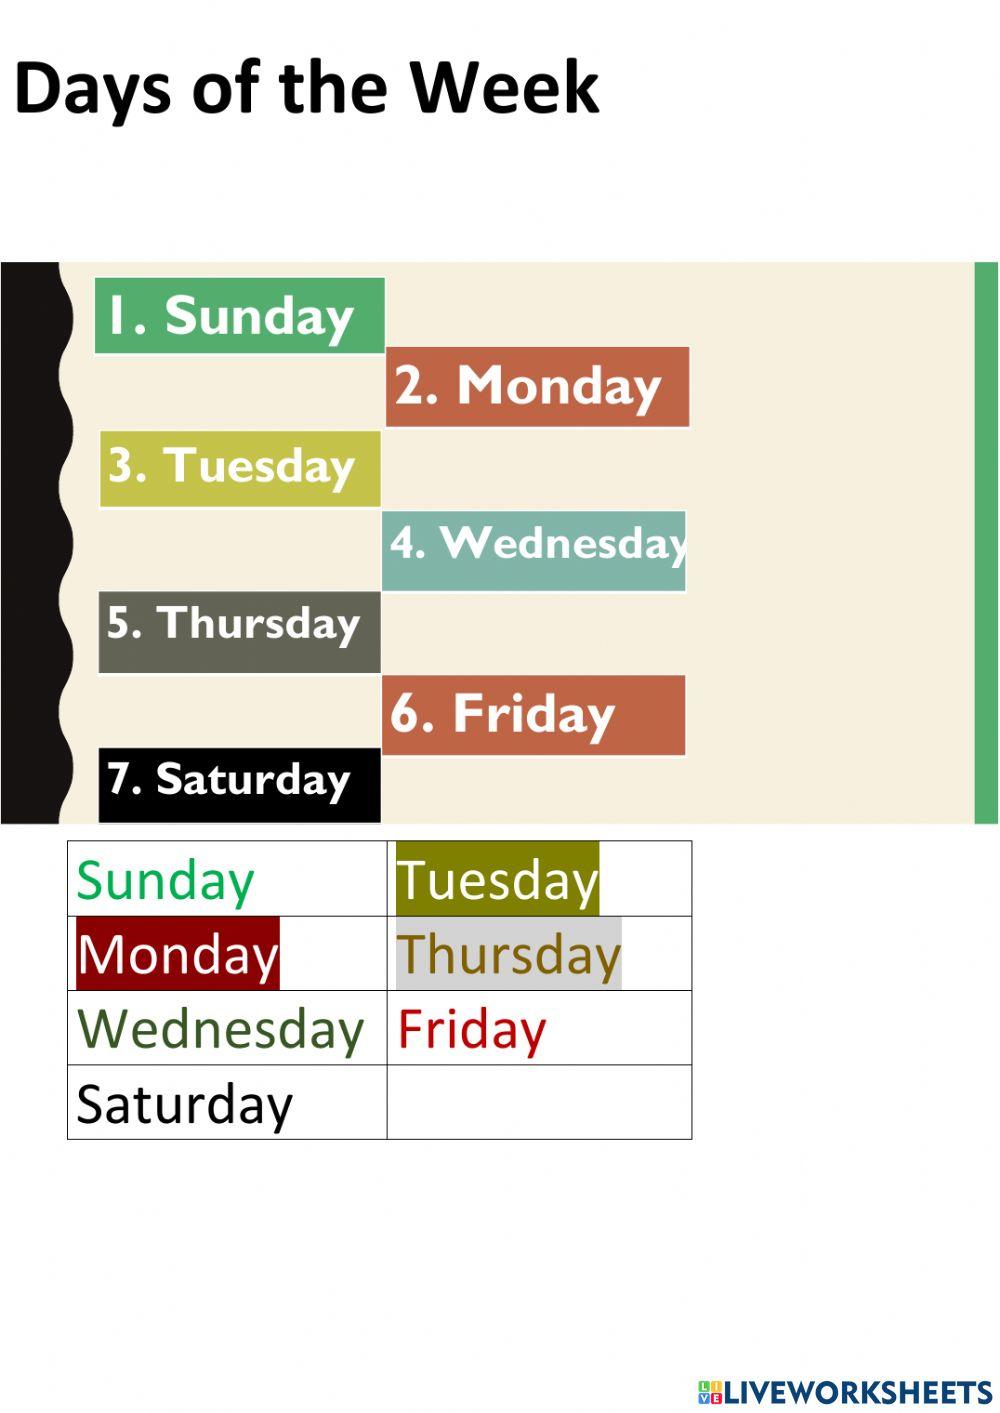 Match the Days of the Week